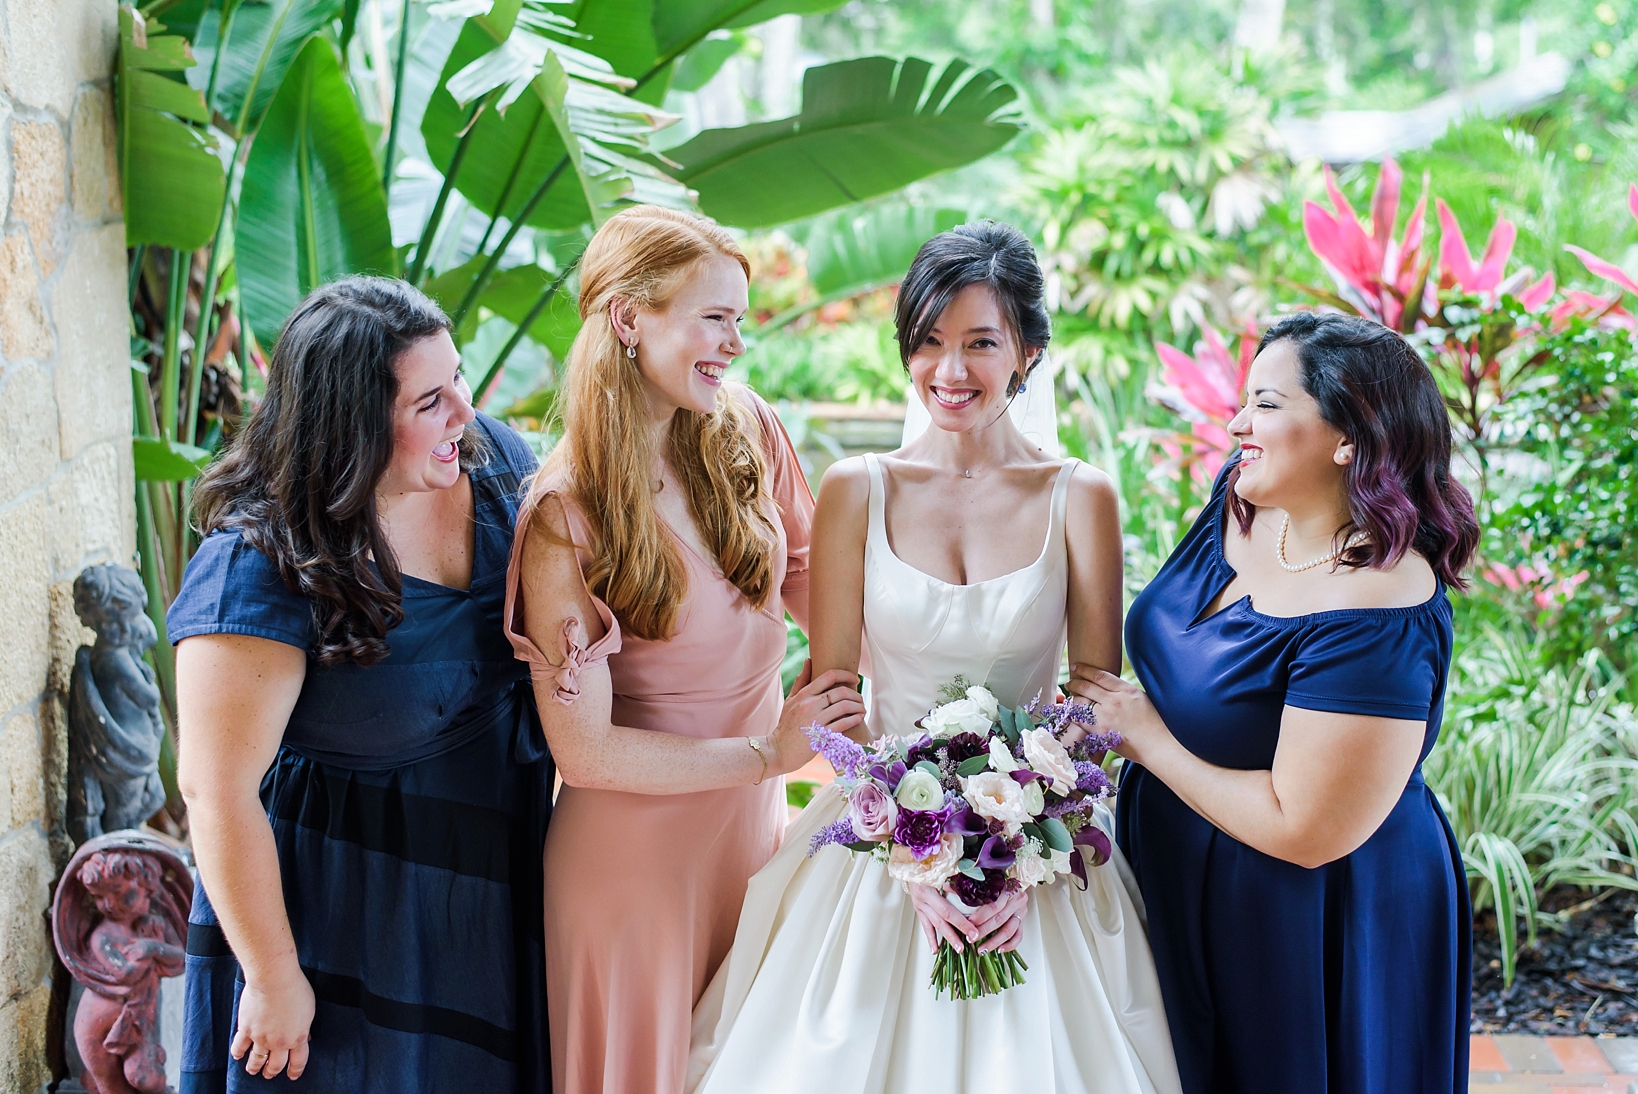 Bride and her bridesmaids smiling in front of a garden right before the wedding ceremony by Sarah & Ben Photography